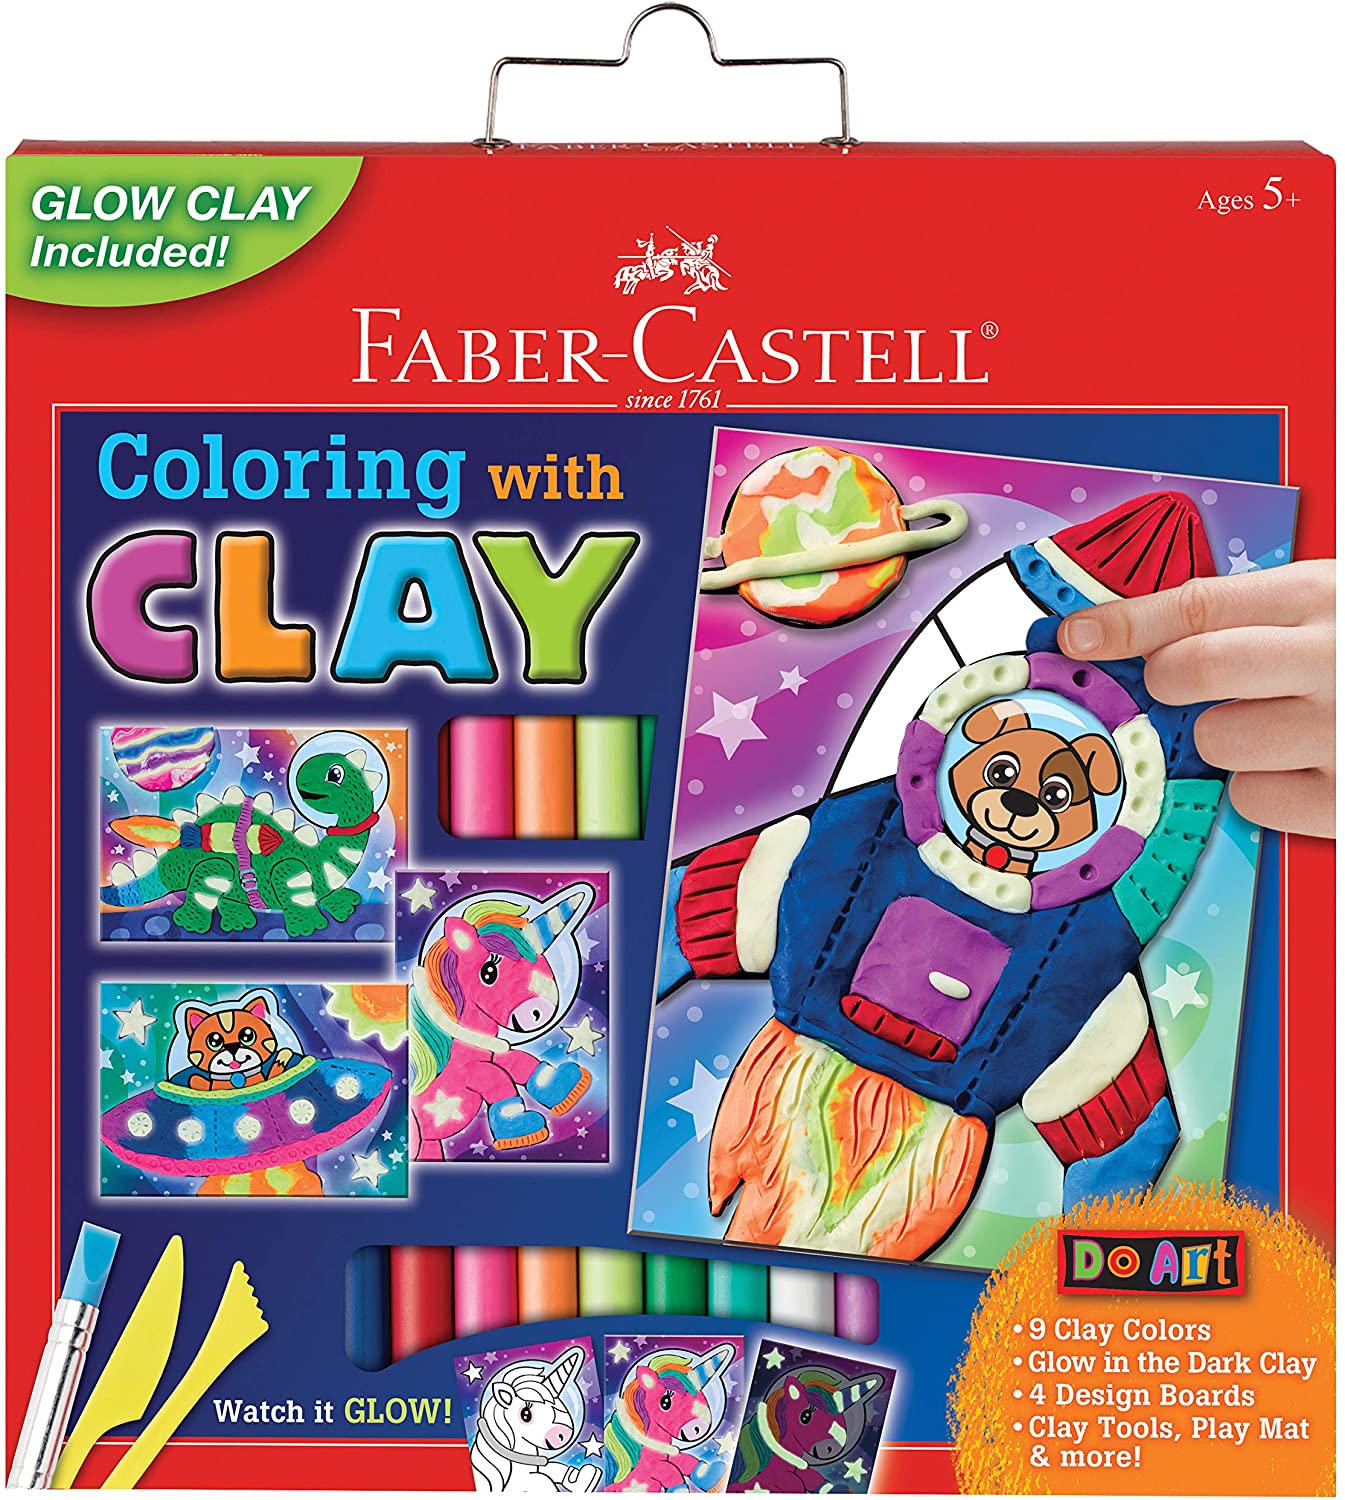 Faber-Castell Do Art Coloring w/ Clay Kit for Kids' (Space Pets) $7.50 + Free Shipping w/ Prime or $25+